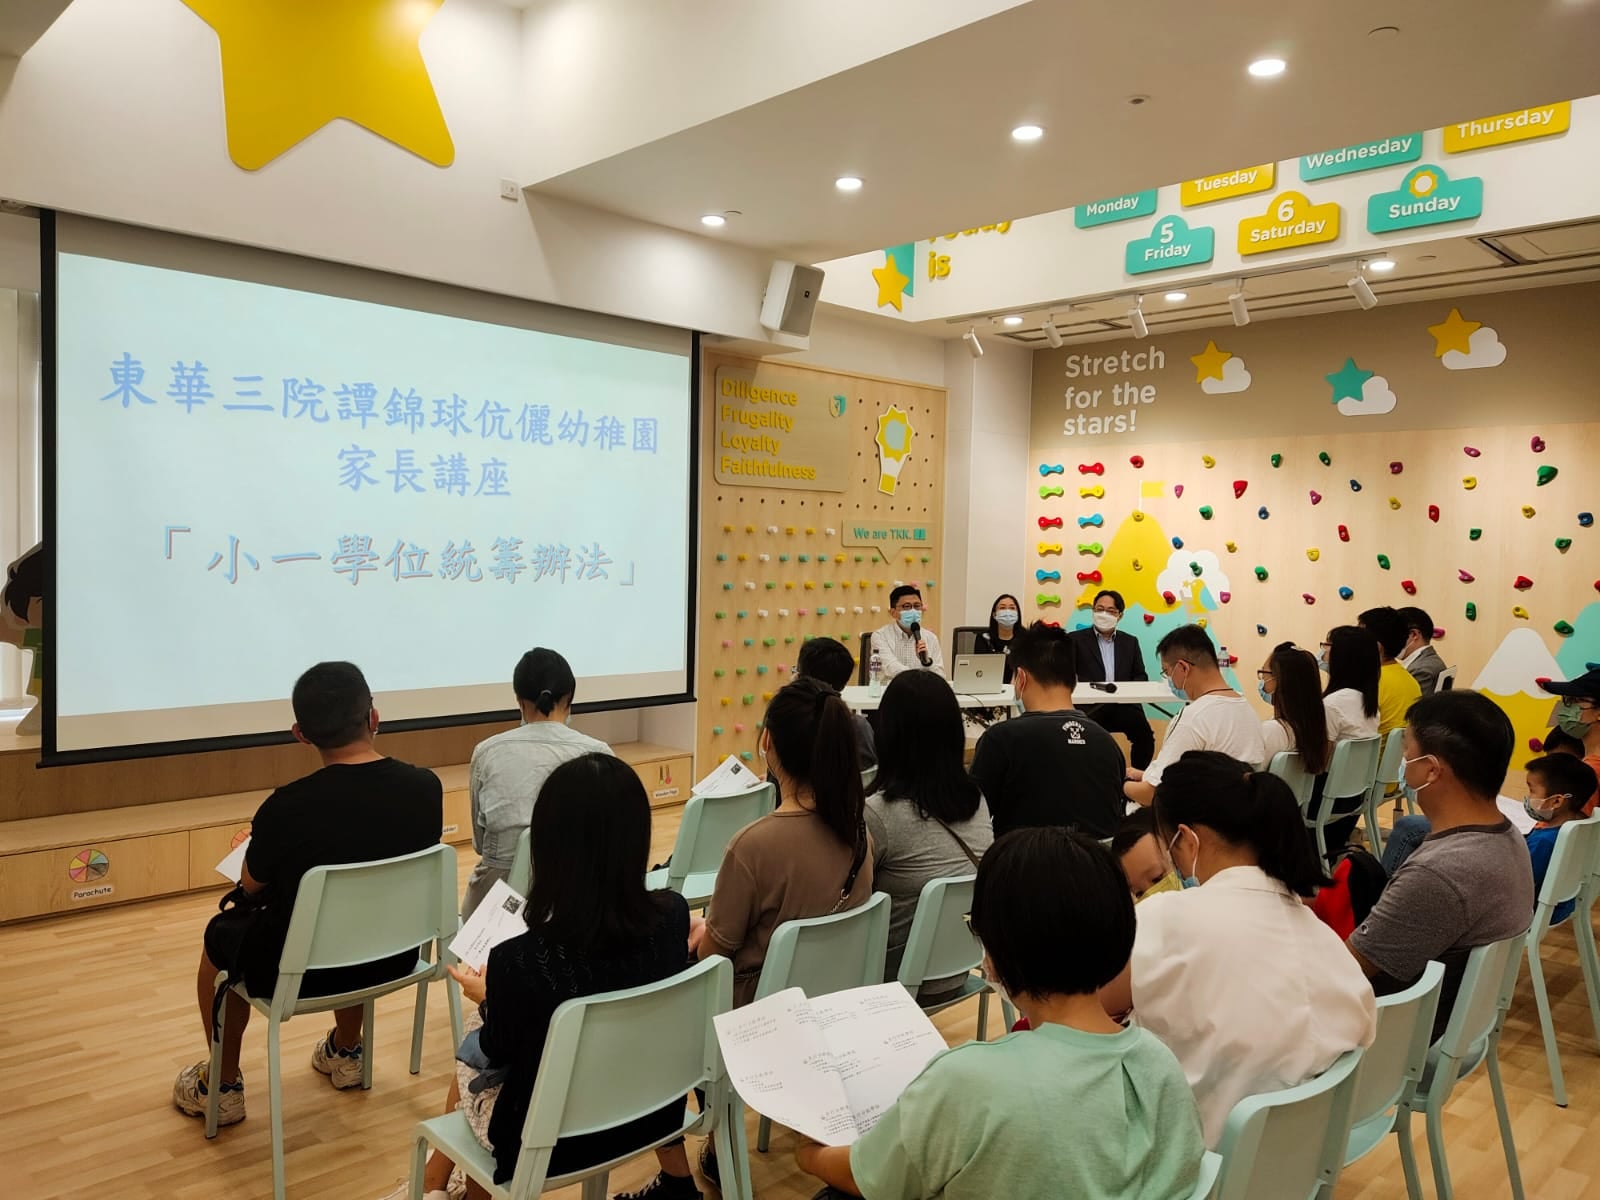 2021/22  Primary One Admission Briefing Session and Visiting Primary School